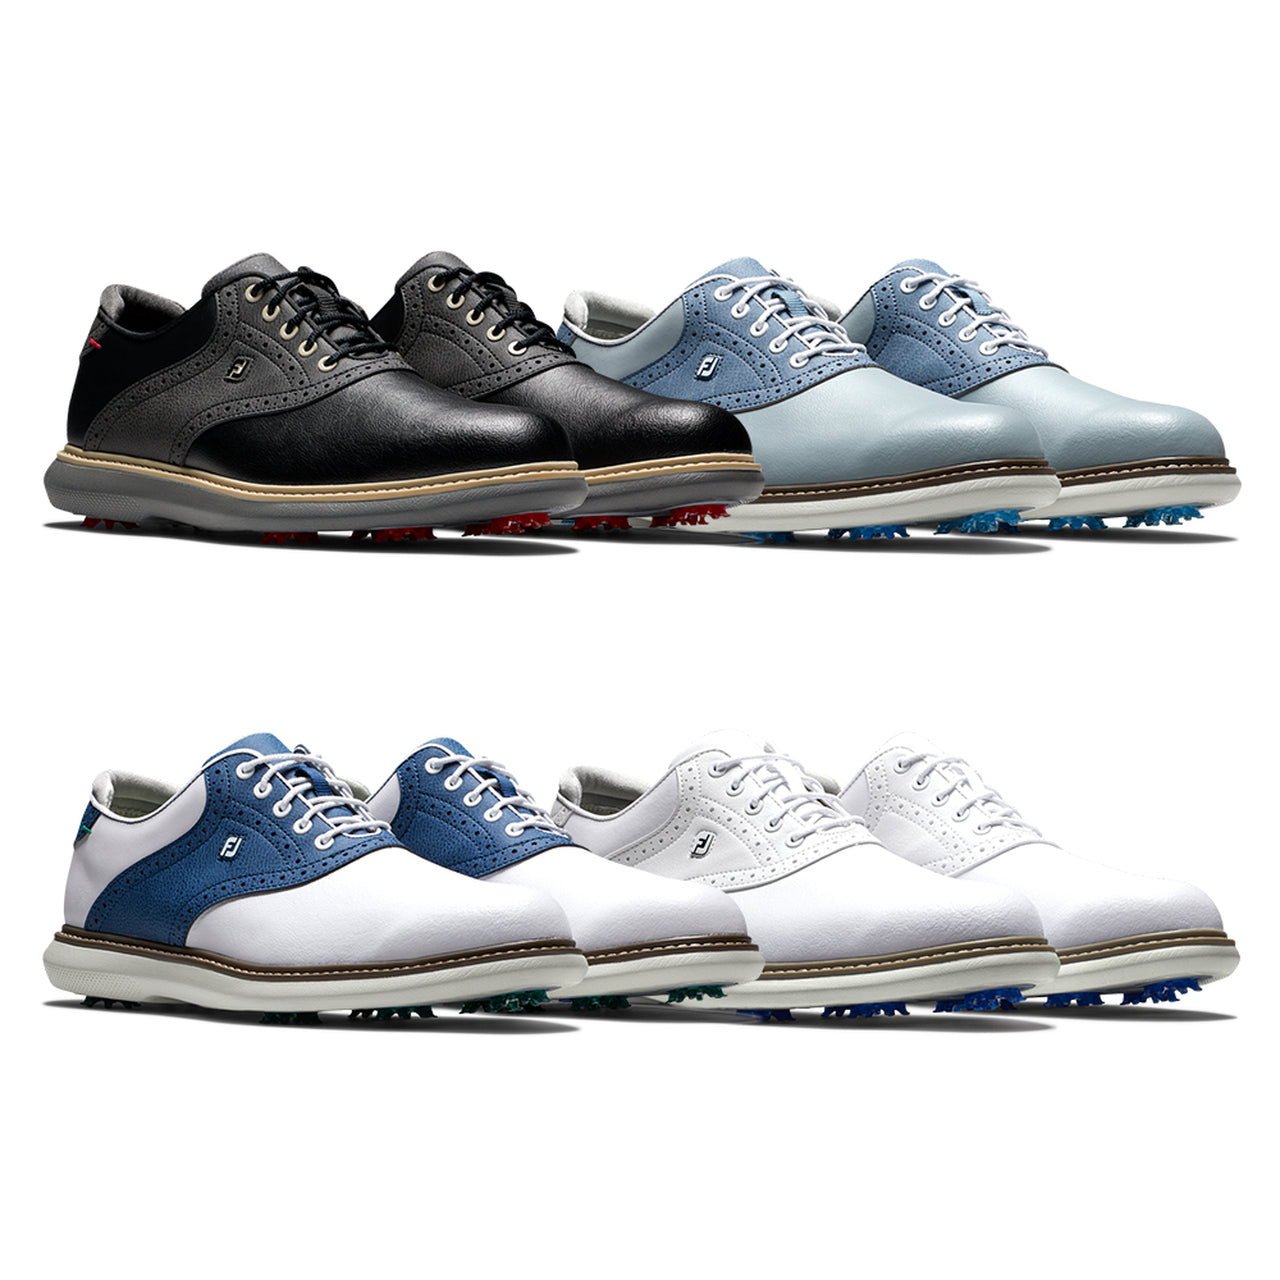 Footjoy Traditions Golf Shoes